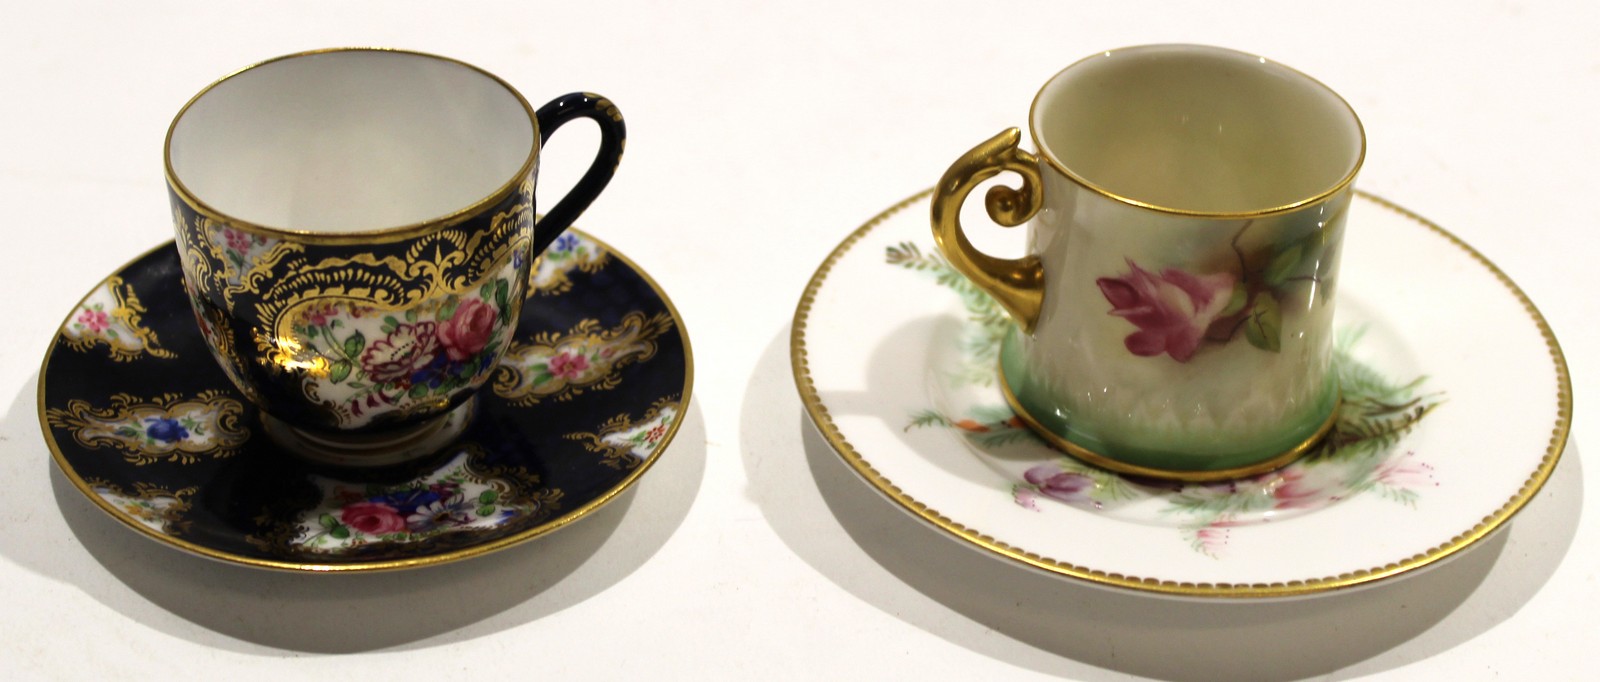 Group of Royal Worcester wares including a cup and saucer^ the blue ground with 18th century style